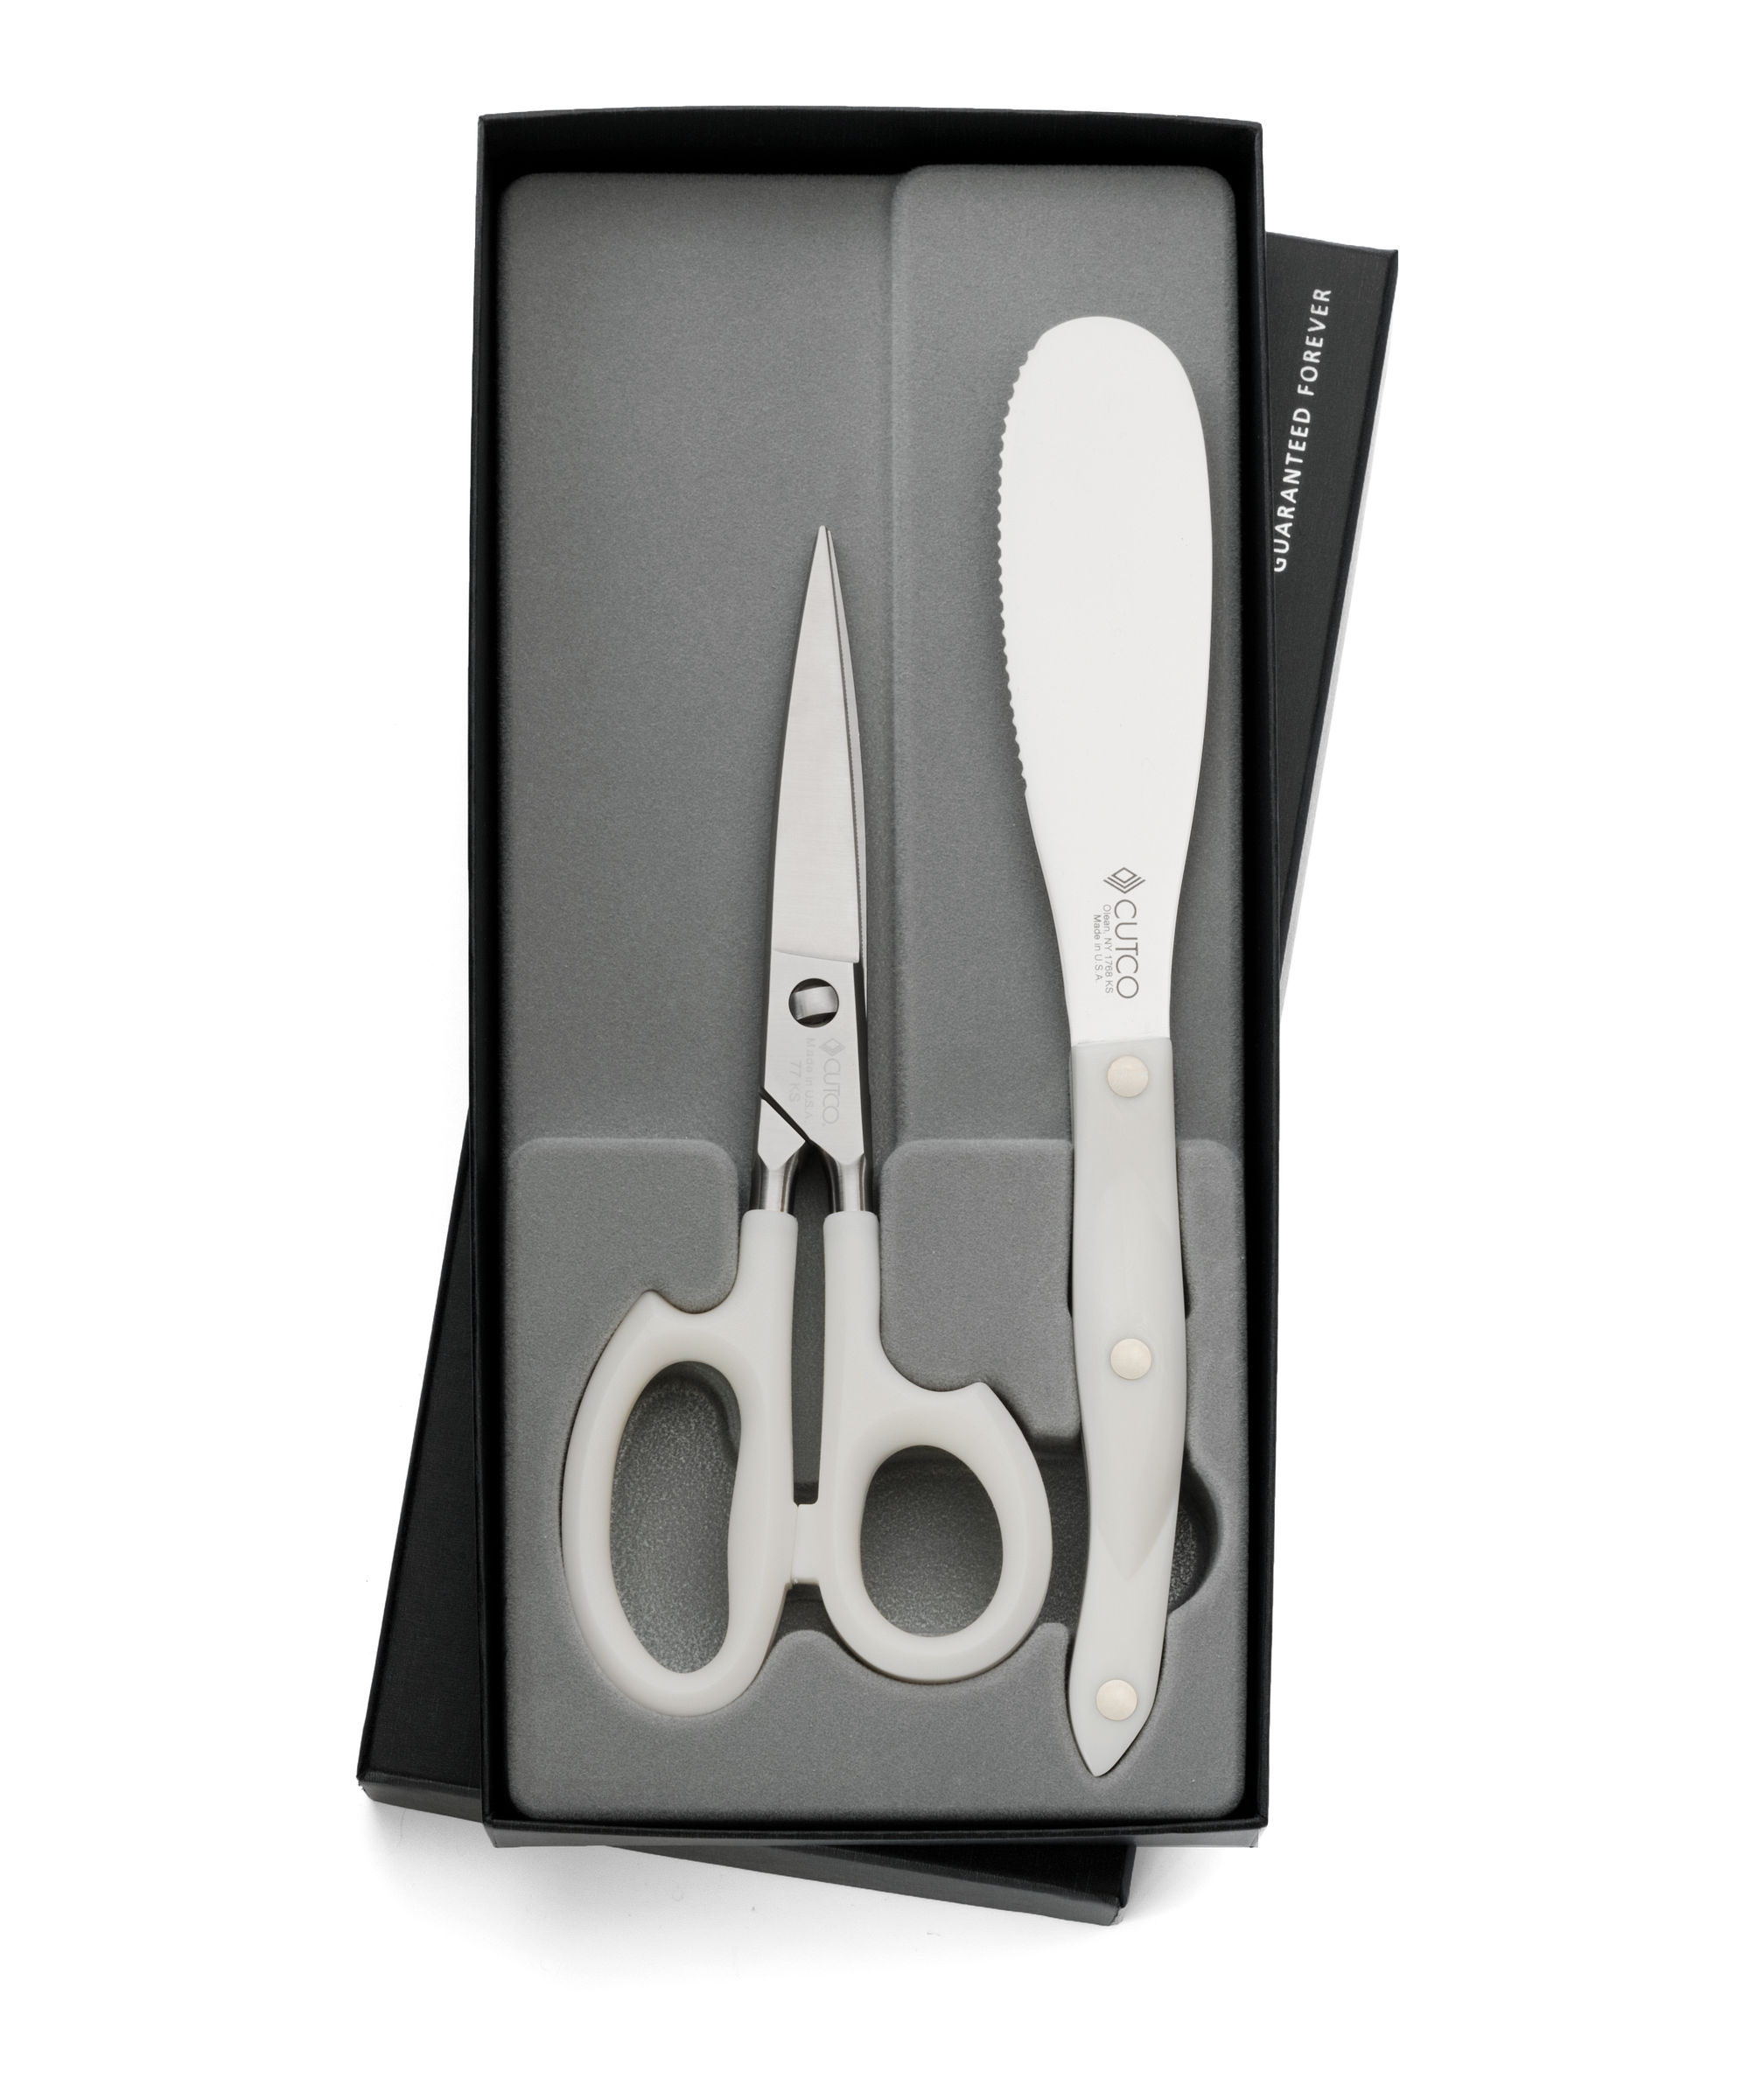 CUTCO Model 77 Super Shears with Pearl White handles..High Carbon  Stainless blades..still in the box from the factory